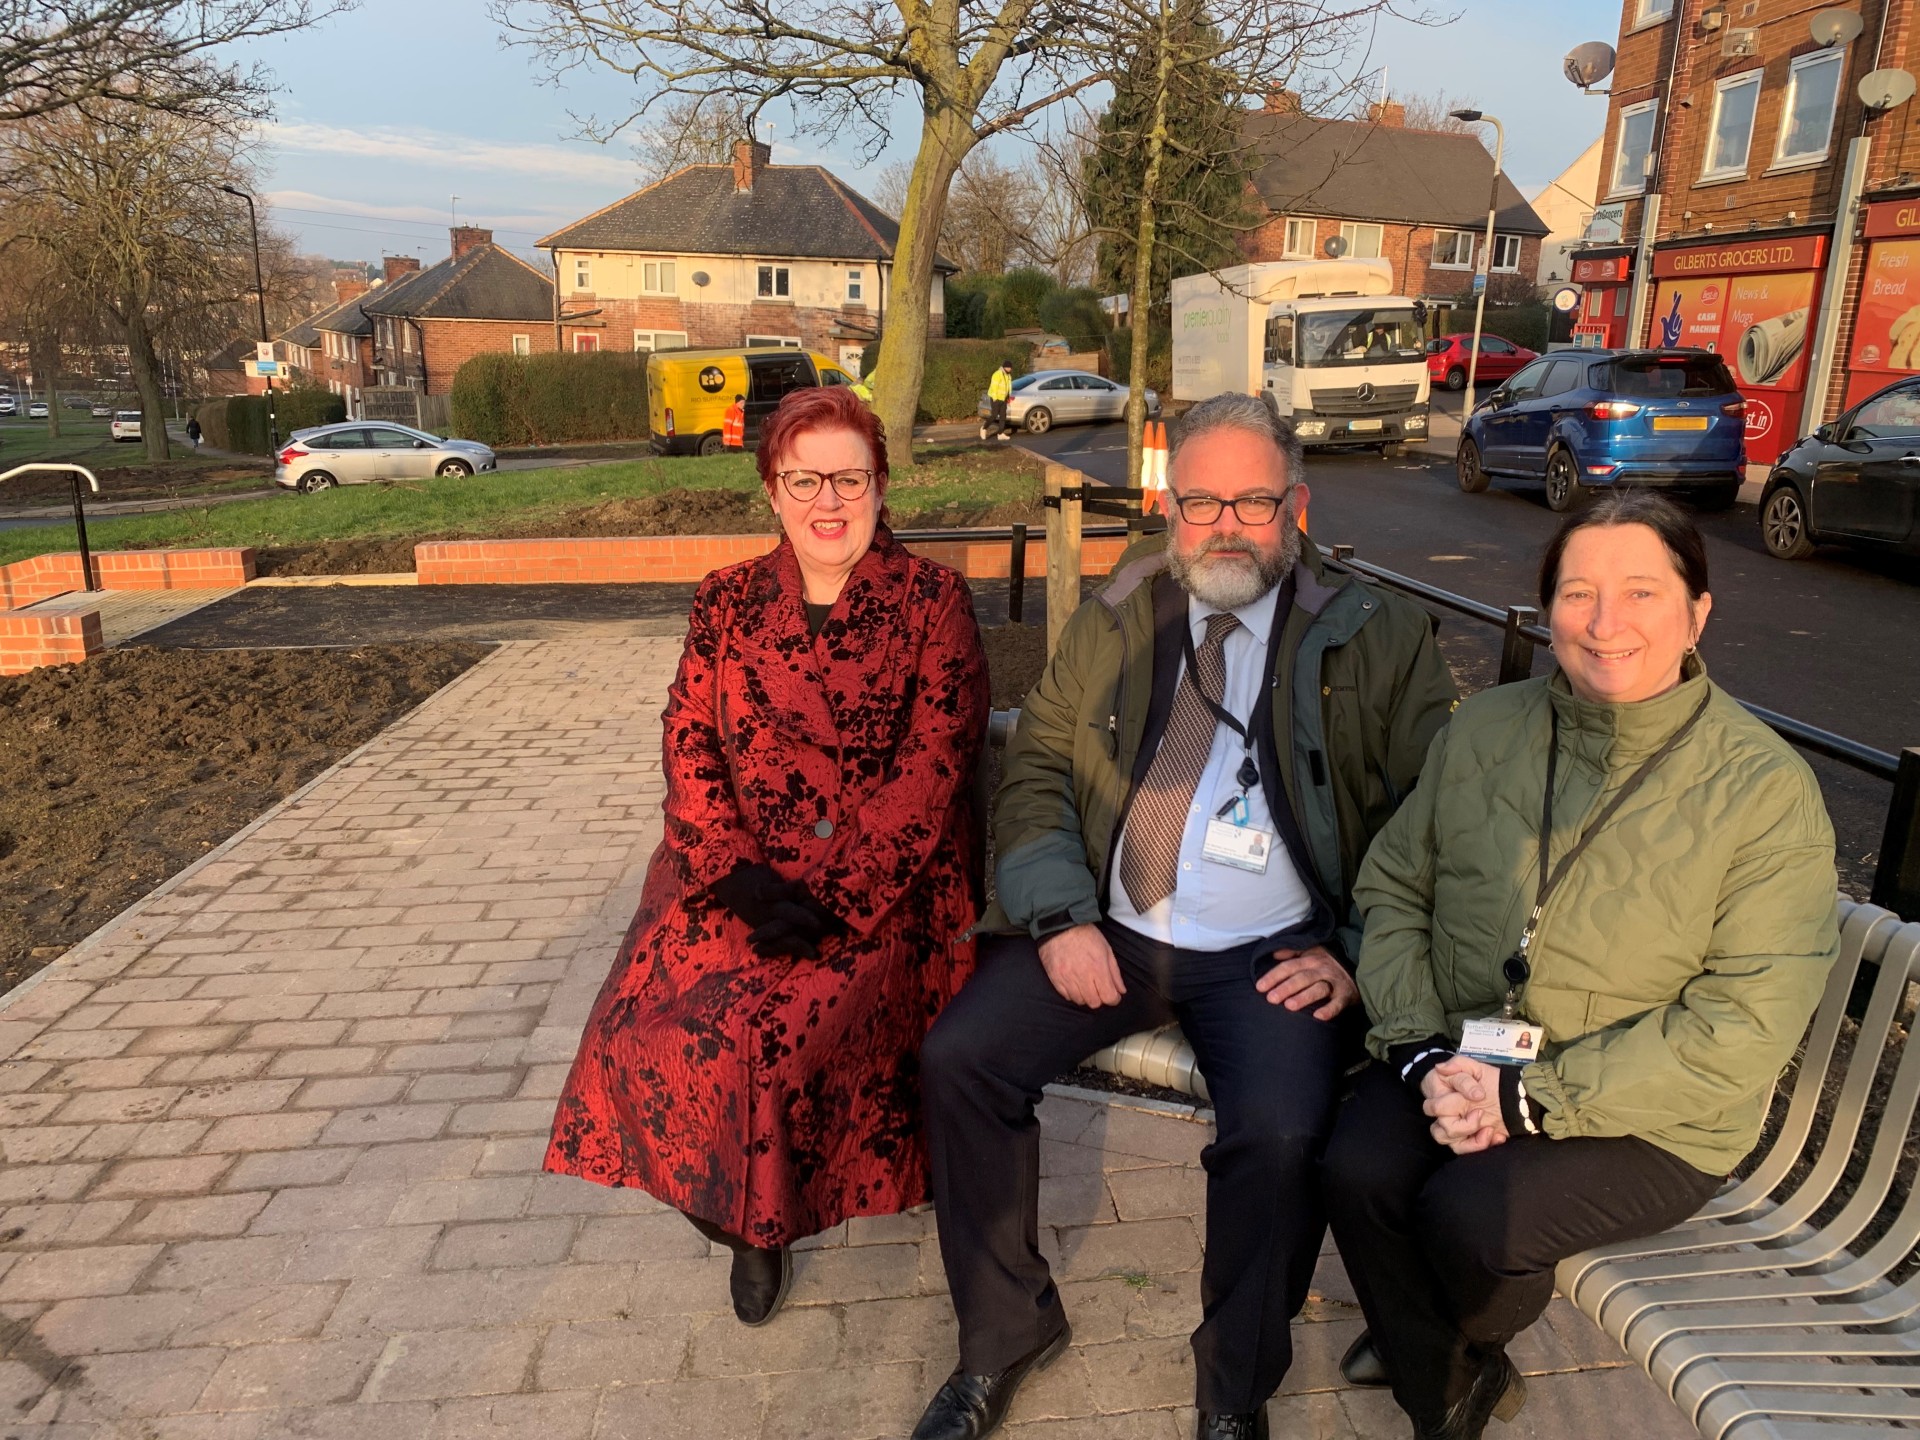 From left to right, the image shows Councillor Sarah Allen, Councillor Michael Bennett-Sylvester and Councillor Joanna Baker-Rogers at the area around Ridgeway Stores